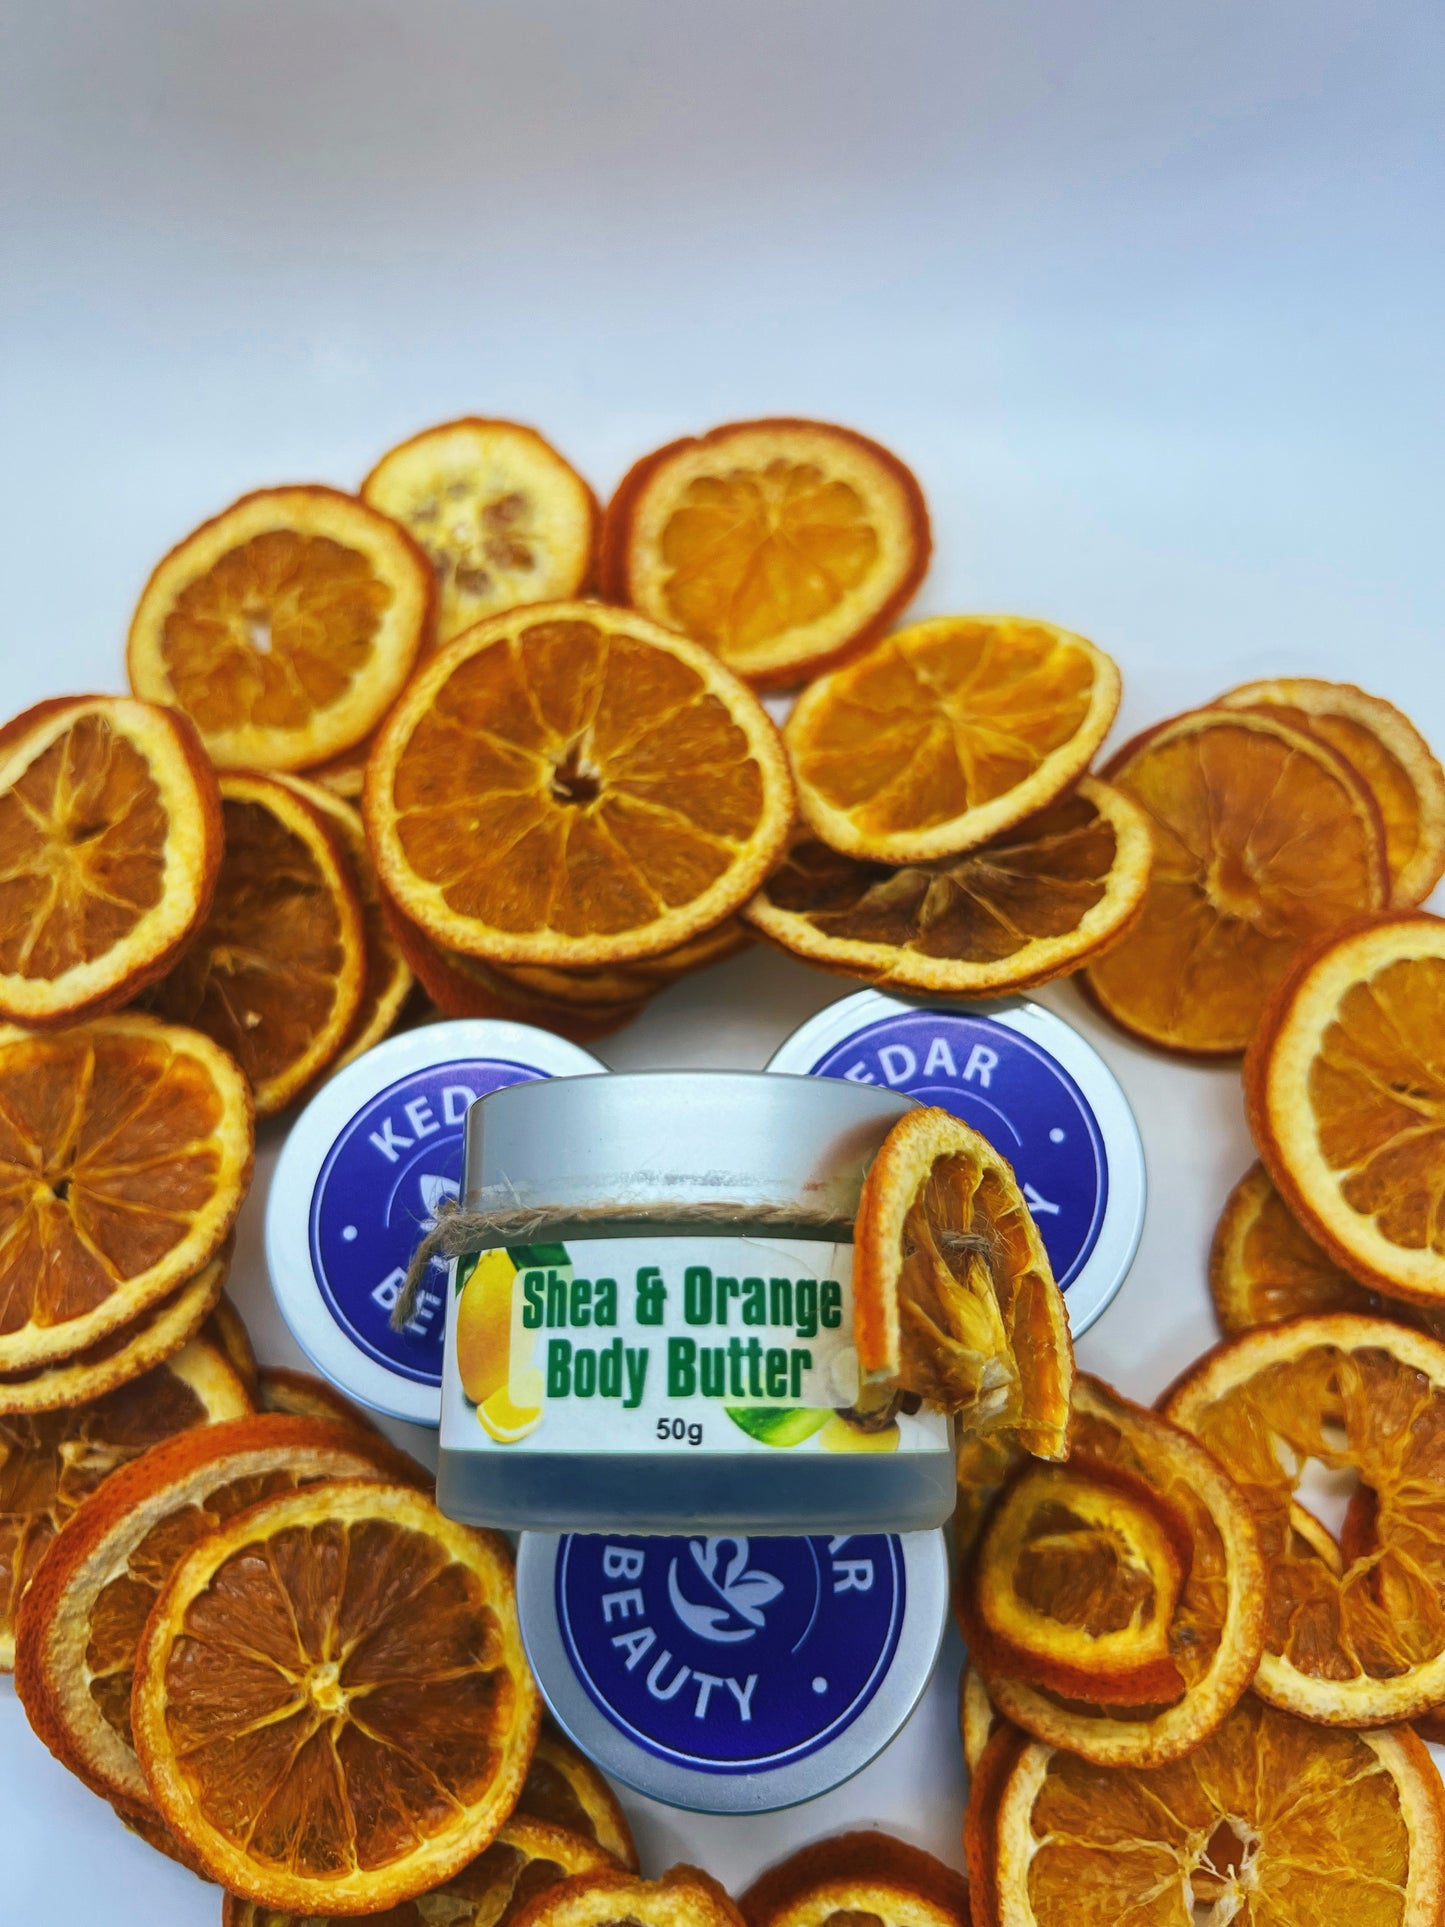 Shea and Orange Body Butter, 50g